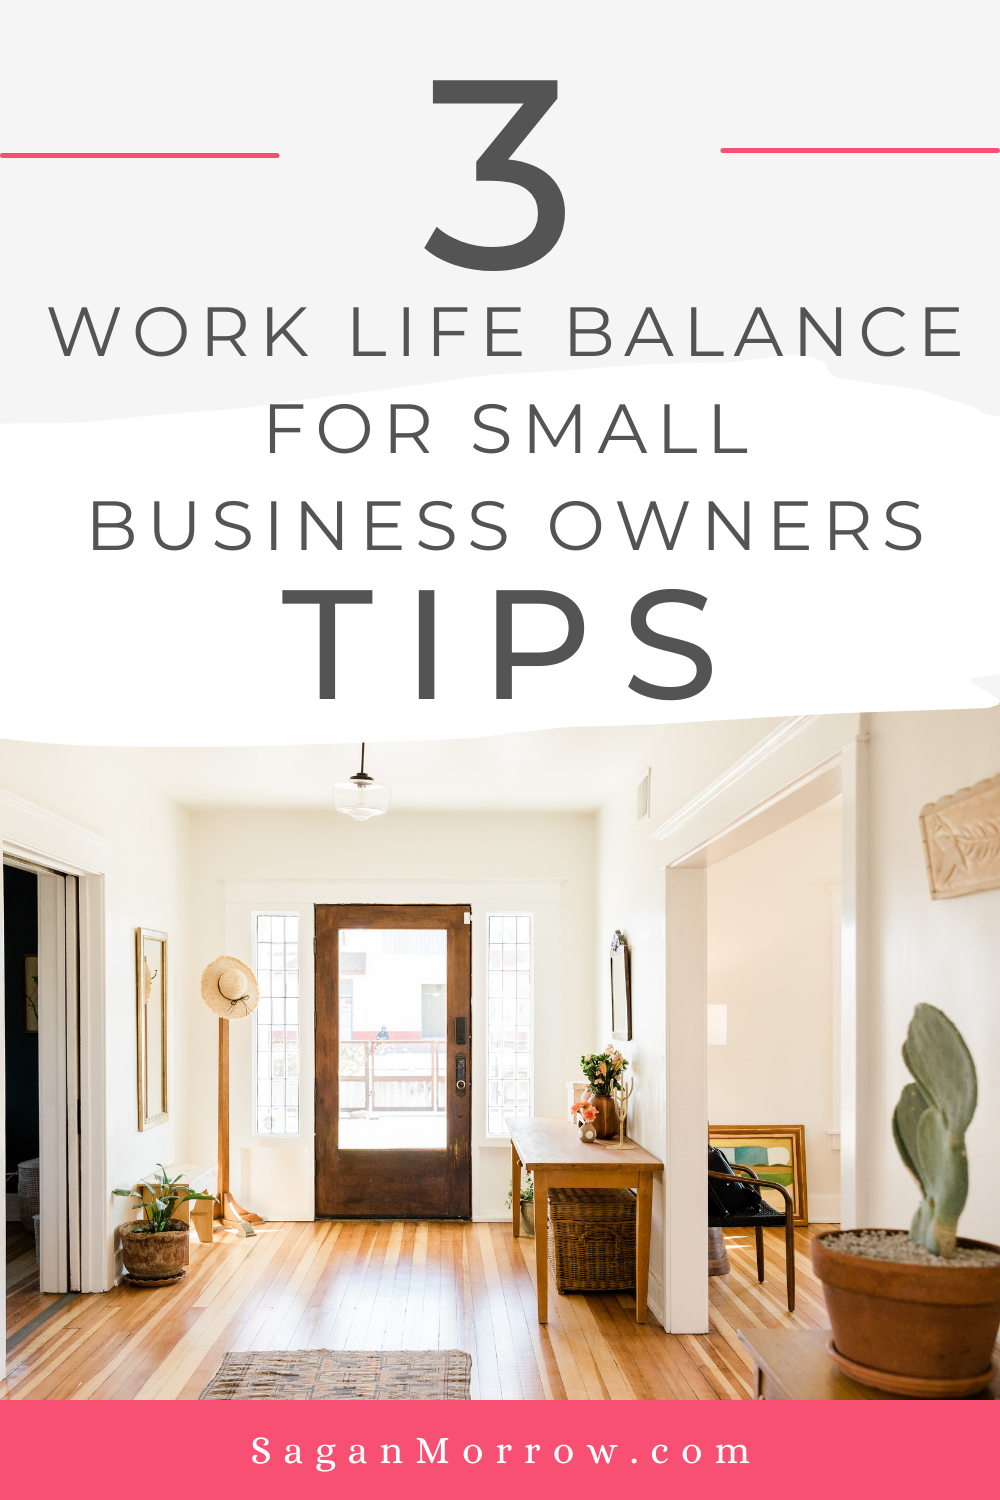 3 tips about work life balance for small business owners